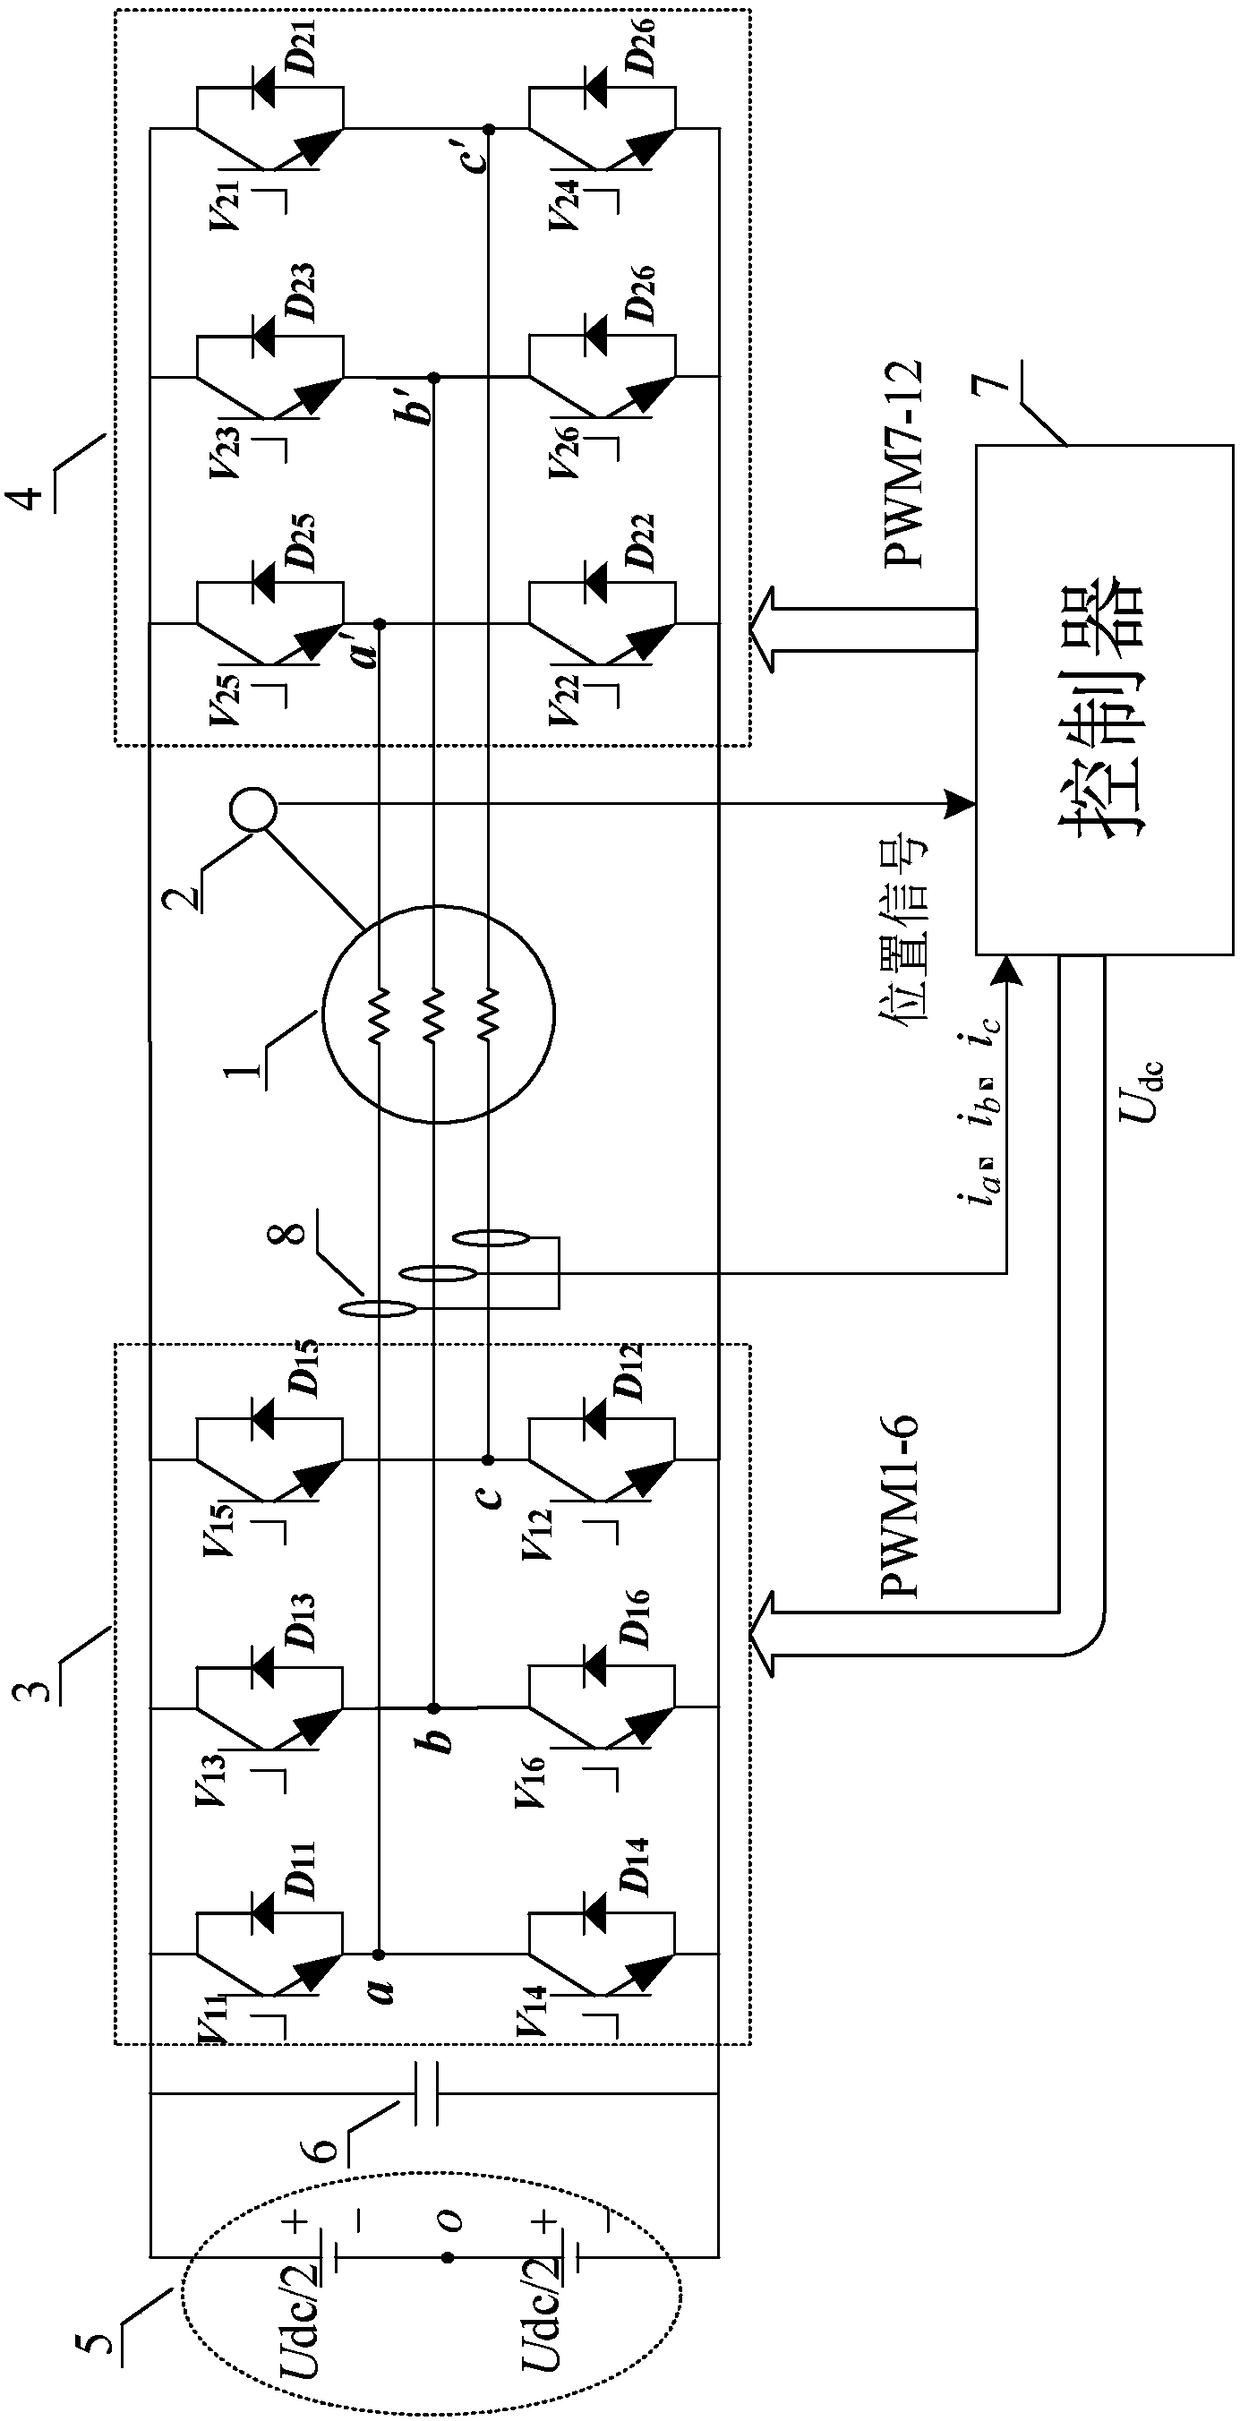 Zero-sequence-current suppressing winding open type permanent magnet synchronous motor vector control method